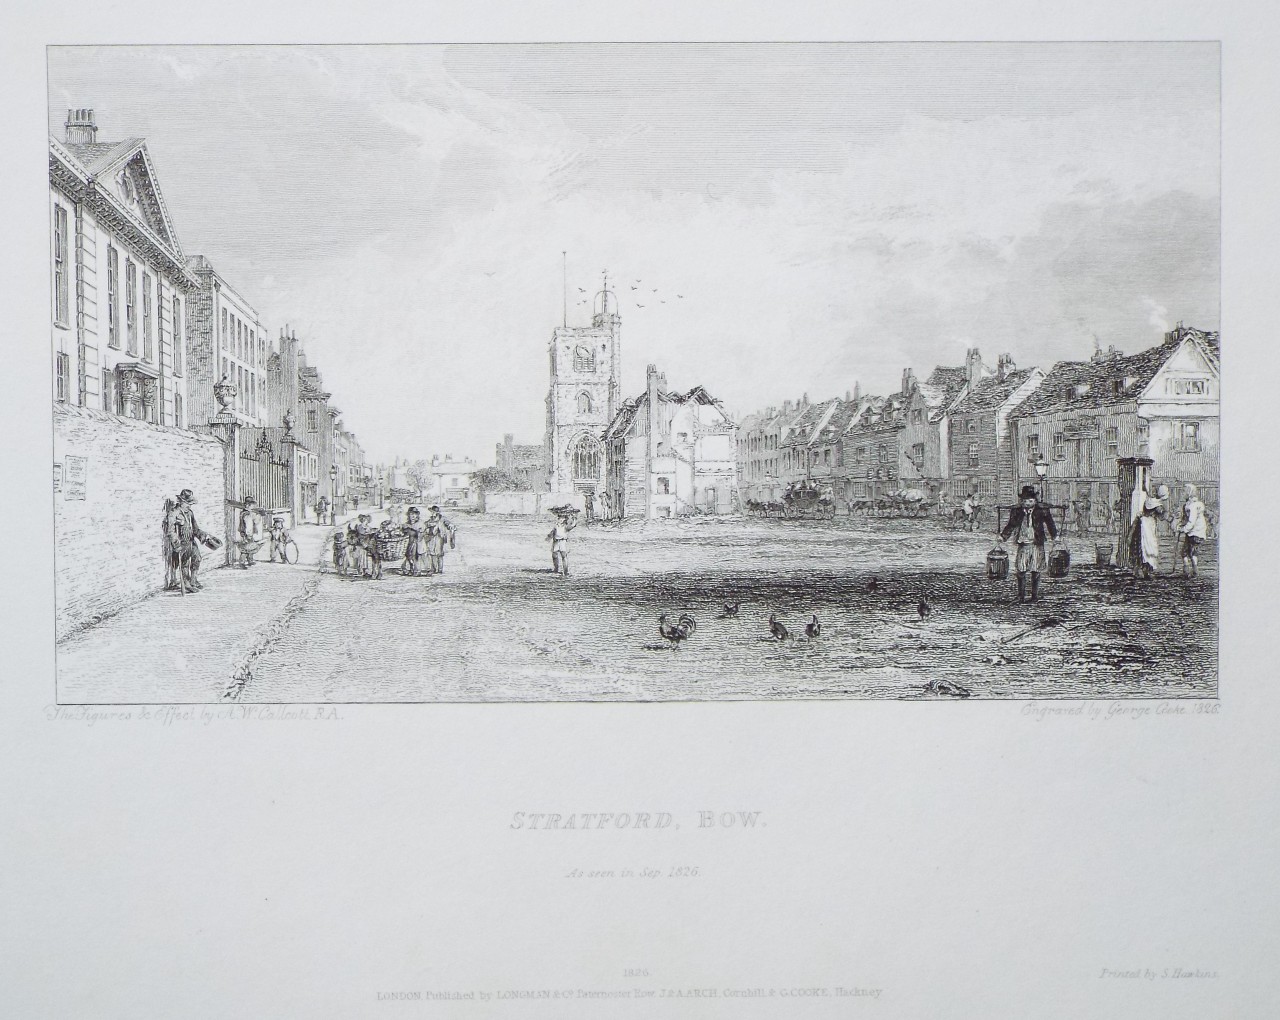 Print - Stratford, Bow as seen in Sep 1826 - Cooke